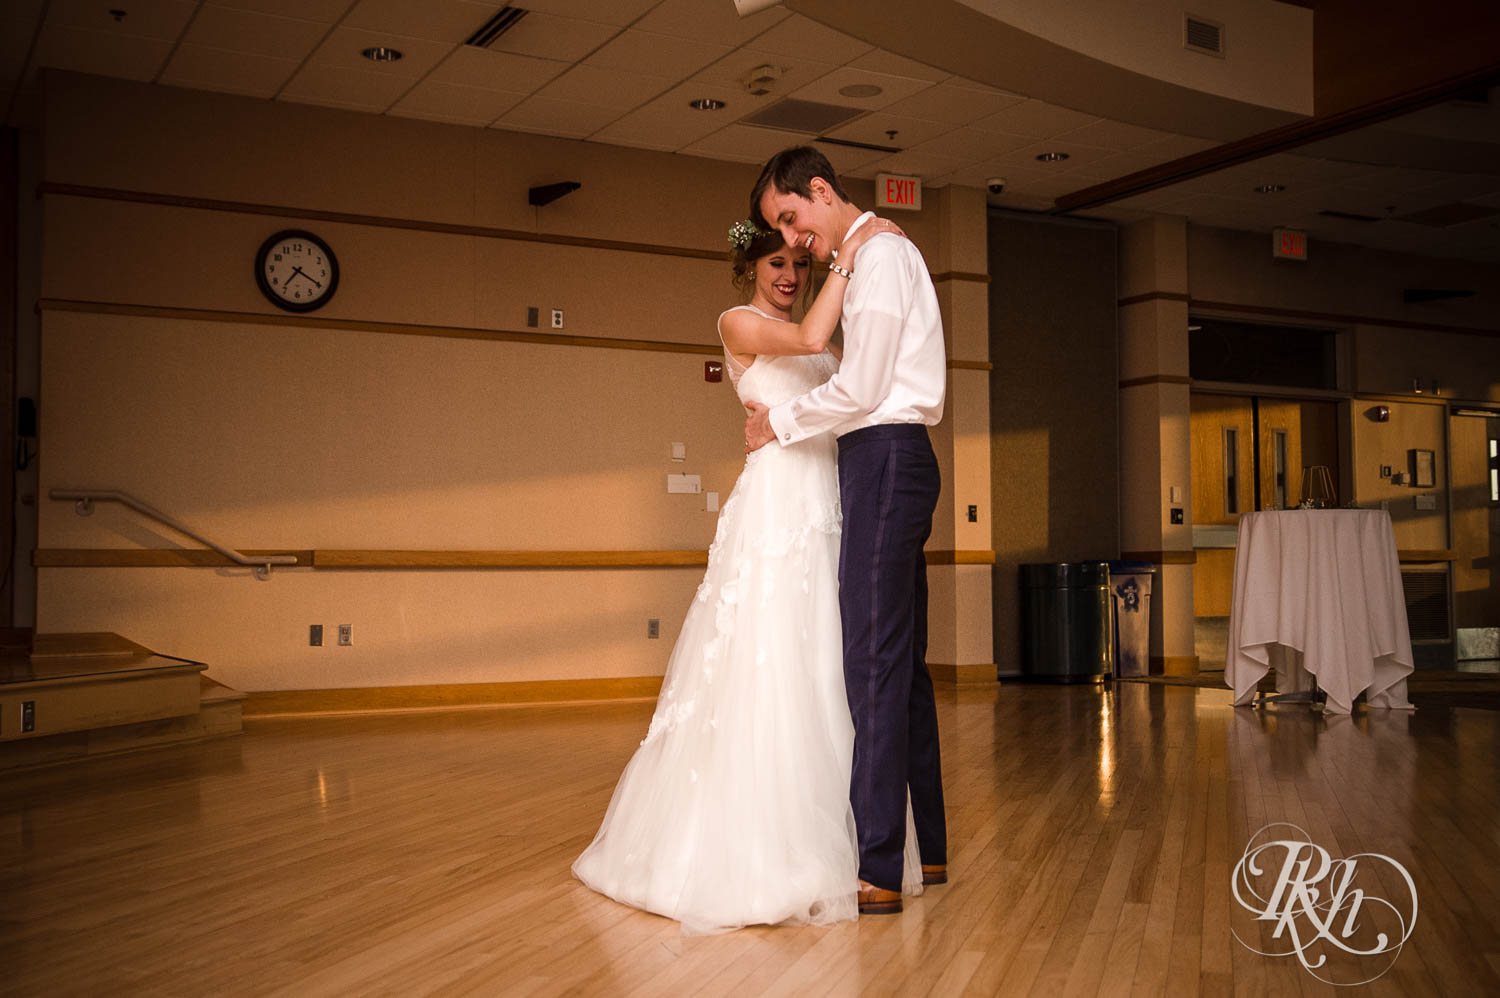 Bride and groom dance during wedding reception at Plymouth Creek Center in Plymouth, Minnesota.